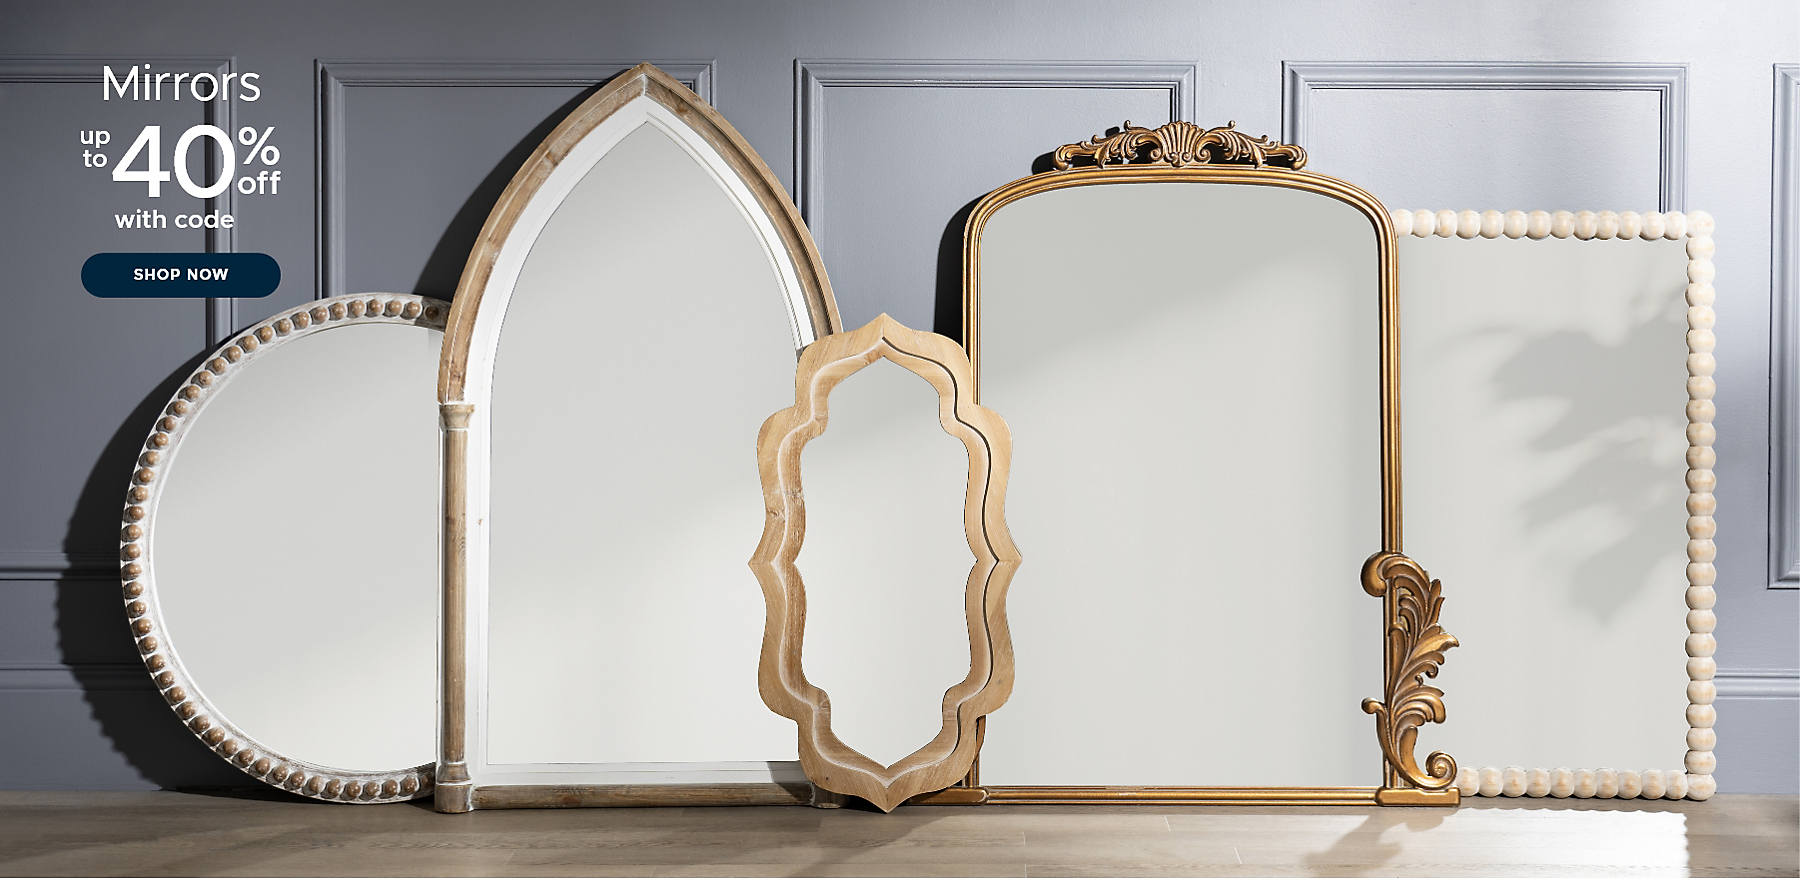 Mirrors up to 40% off with code shop now